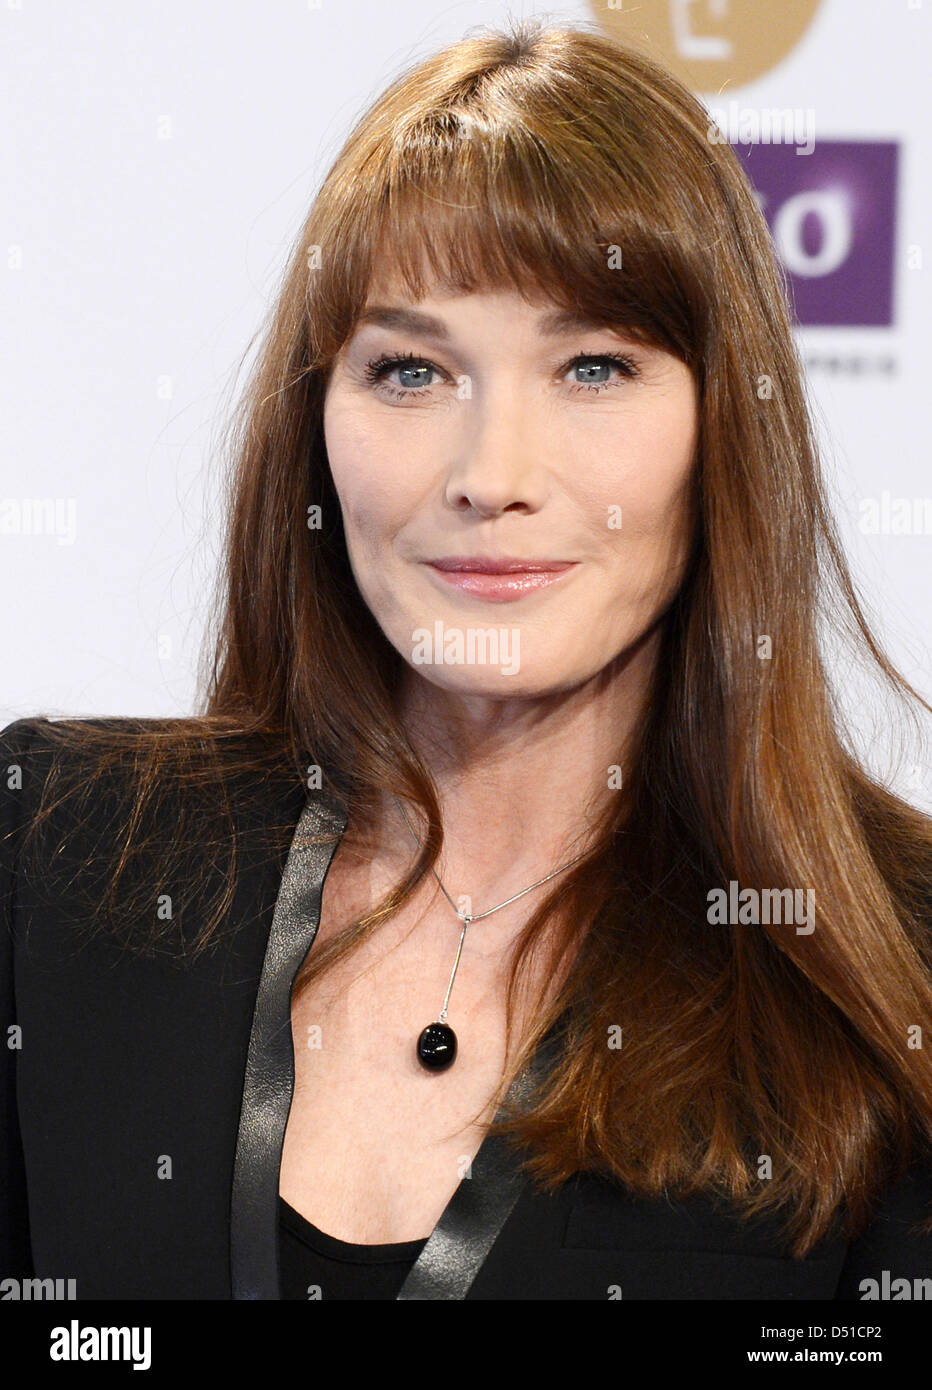 Berlin, Germany, 21 March 2013. French singer Carla Bruni-Sarkozy arrives for the 2013 Echo Music Awards in Berlin. Credit: Jens Kalaene/dpa/Alamy Live News Stock Photo